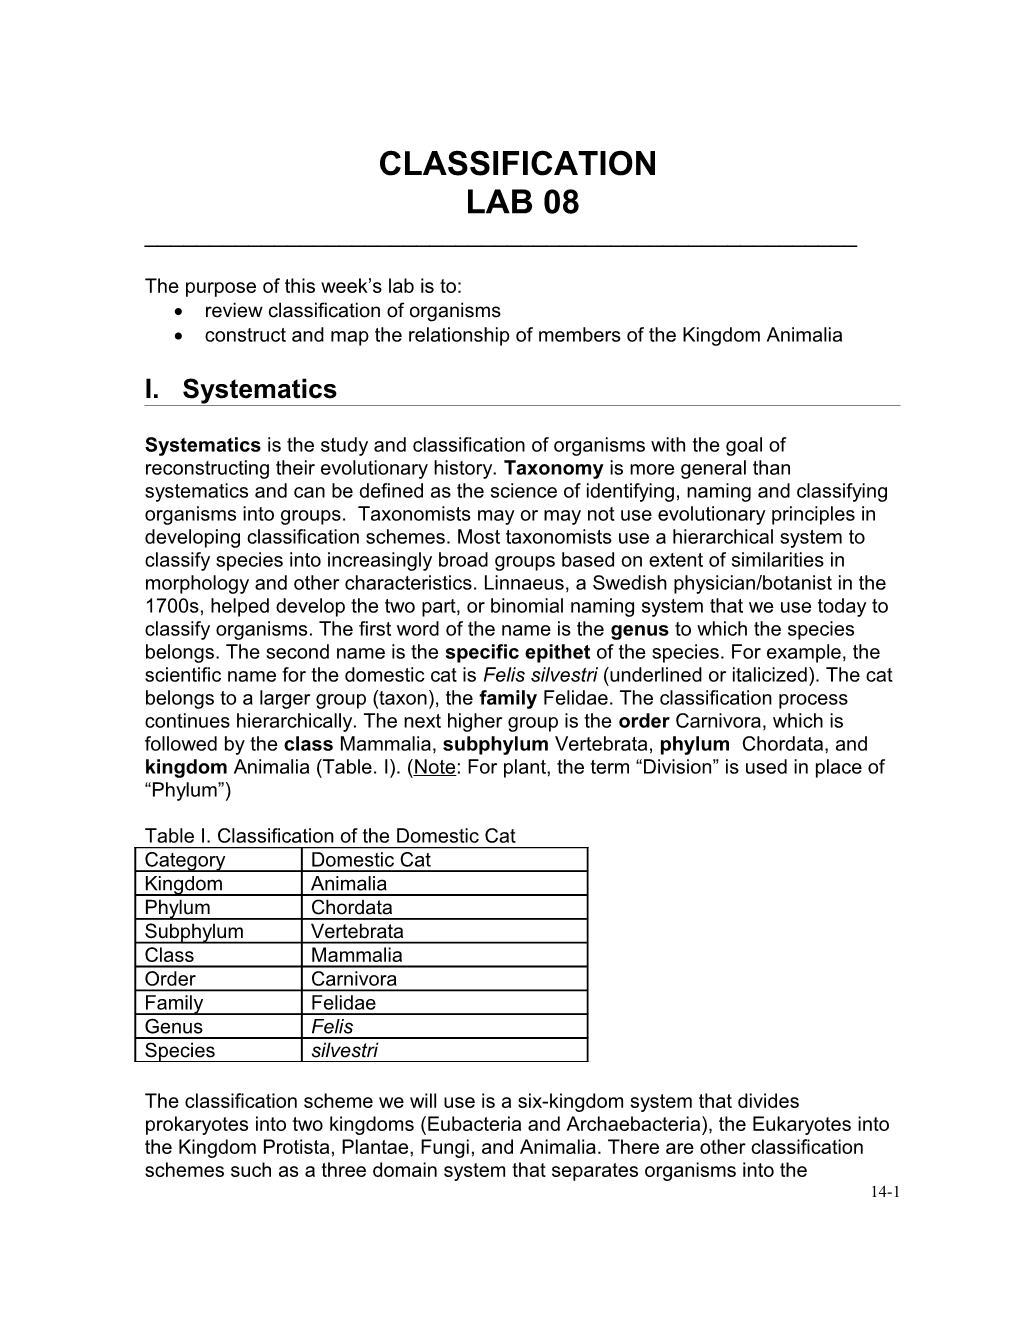 Classification and Phylogenetics